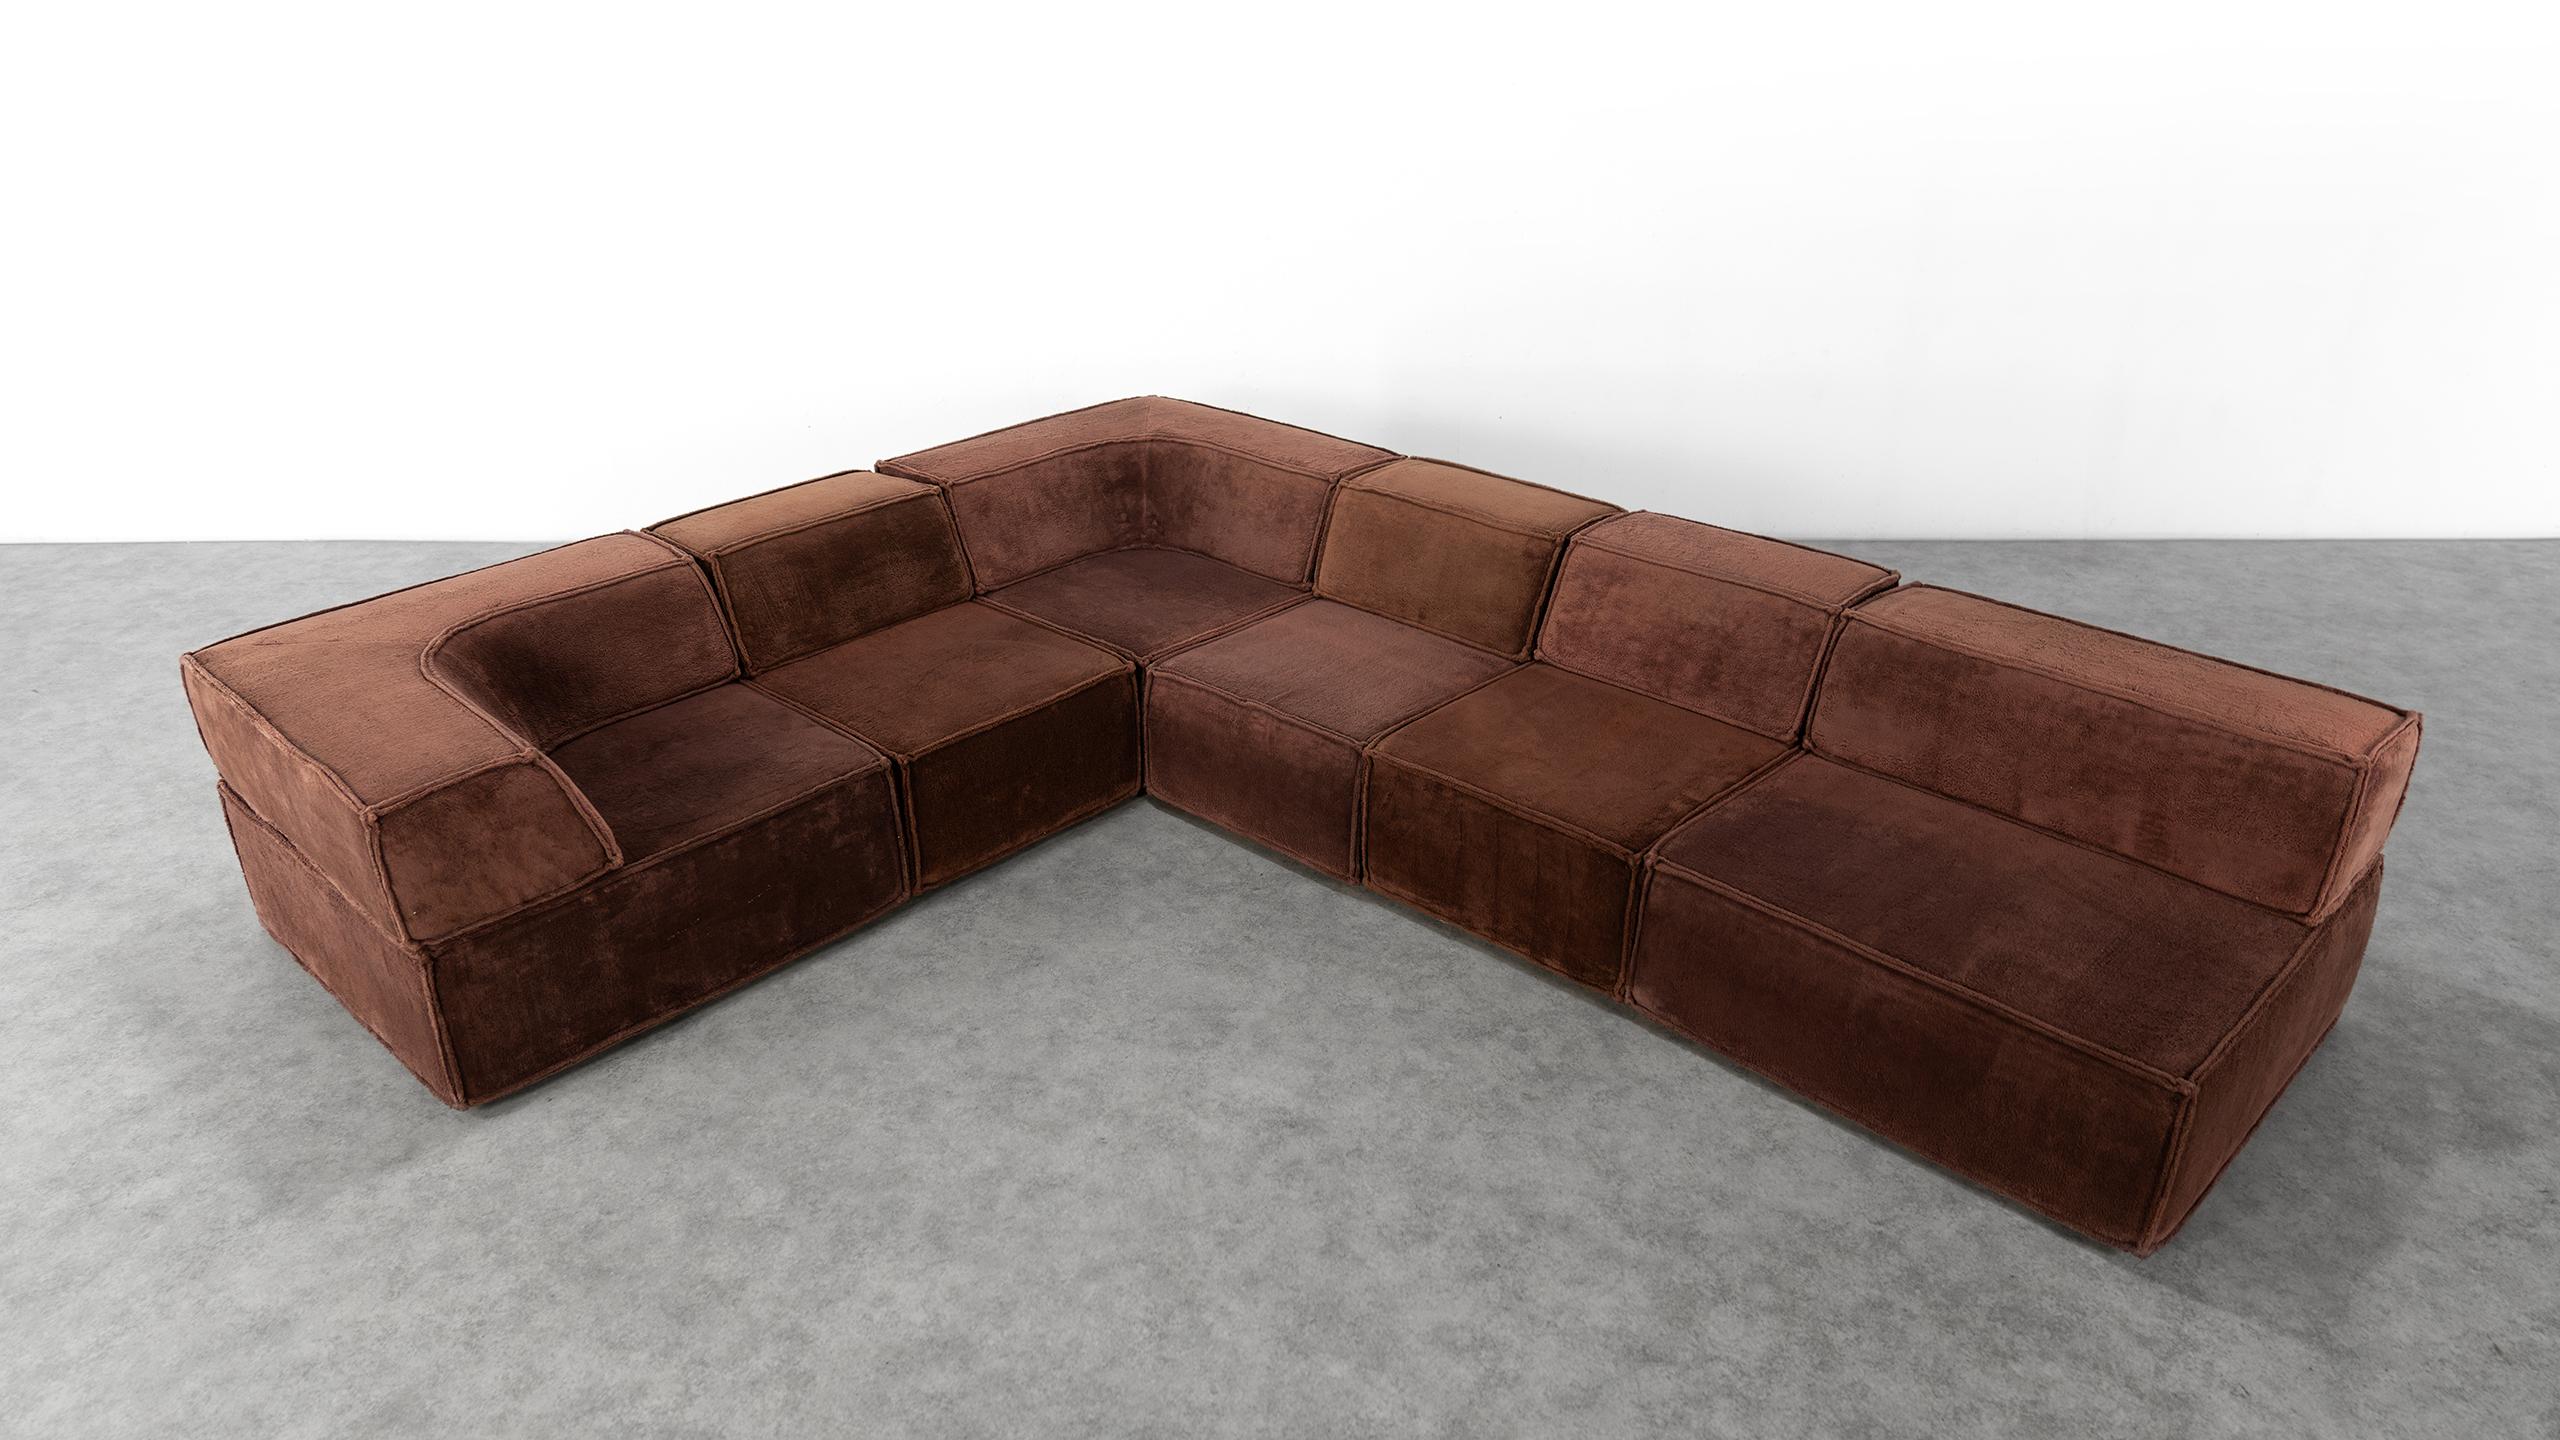 Cor Trio Modular Sofa Giant Landscape Brown Chocolate 1972 by Team Form AG For Sale 7